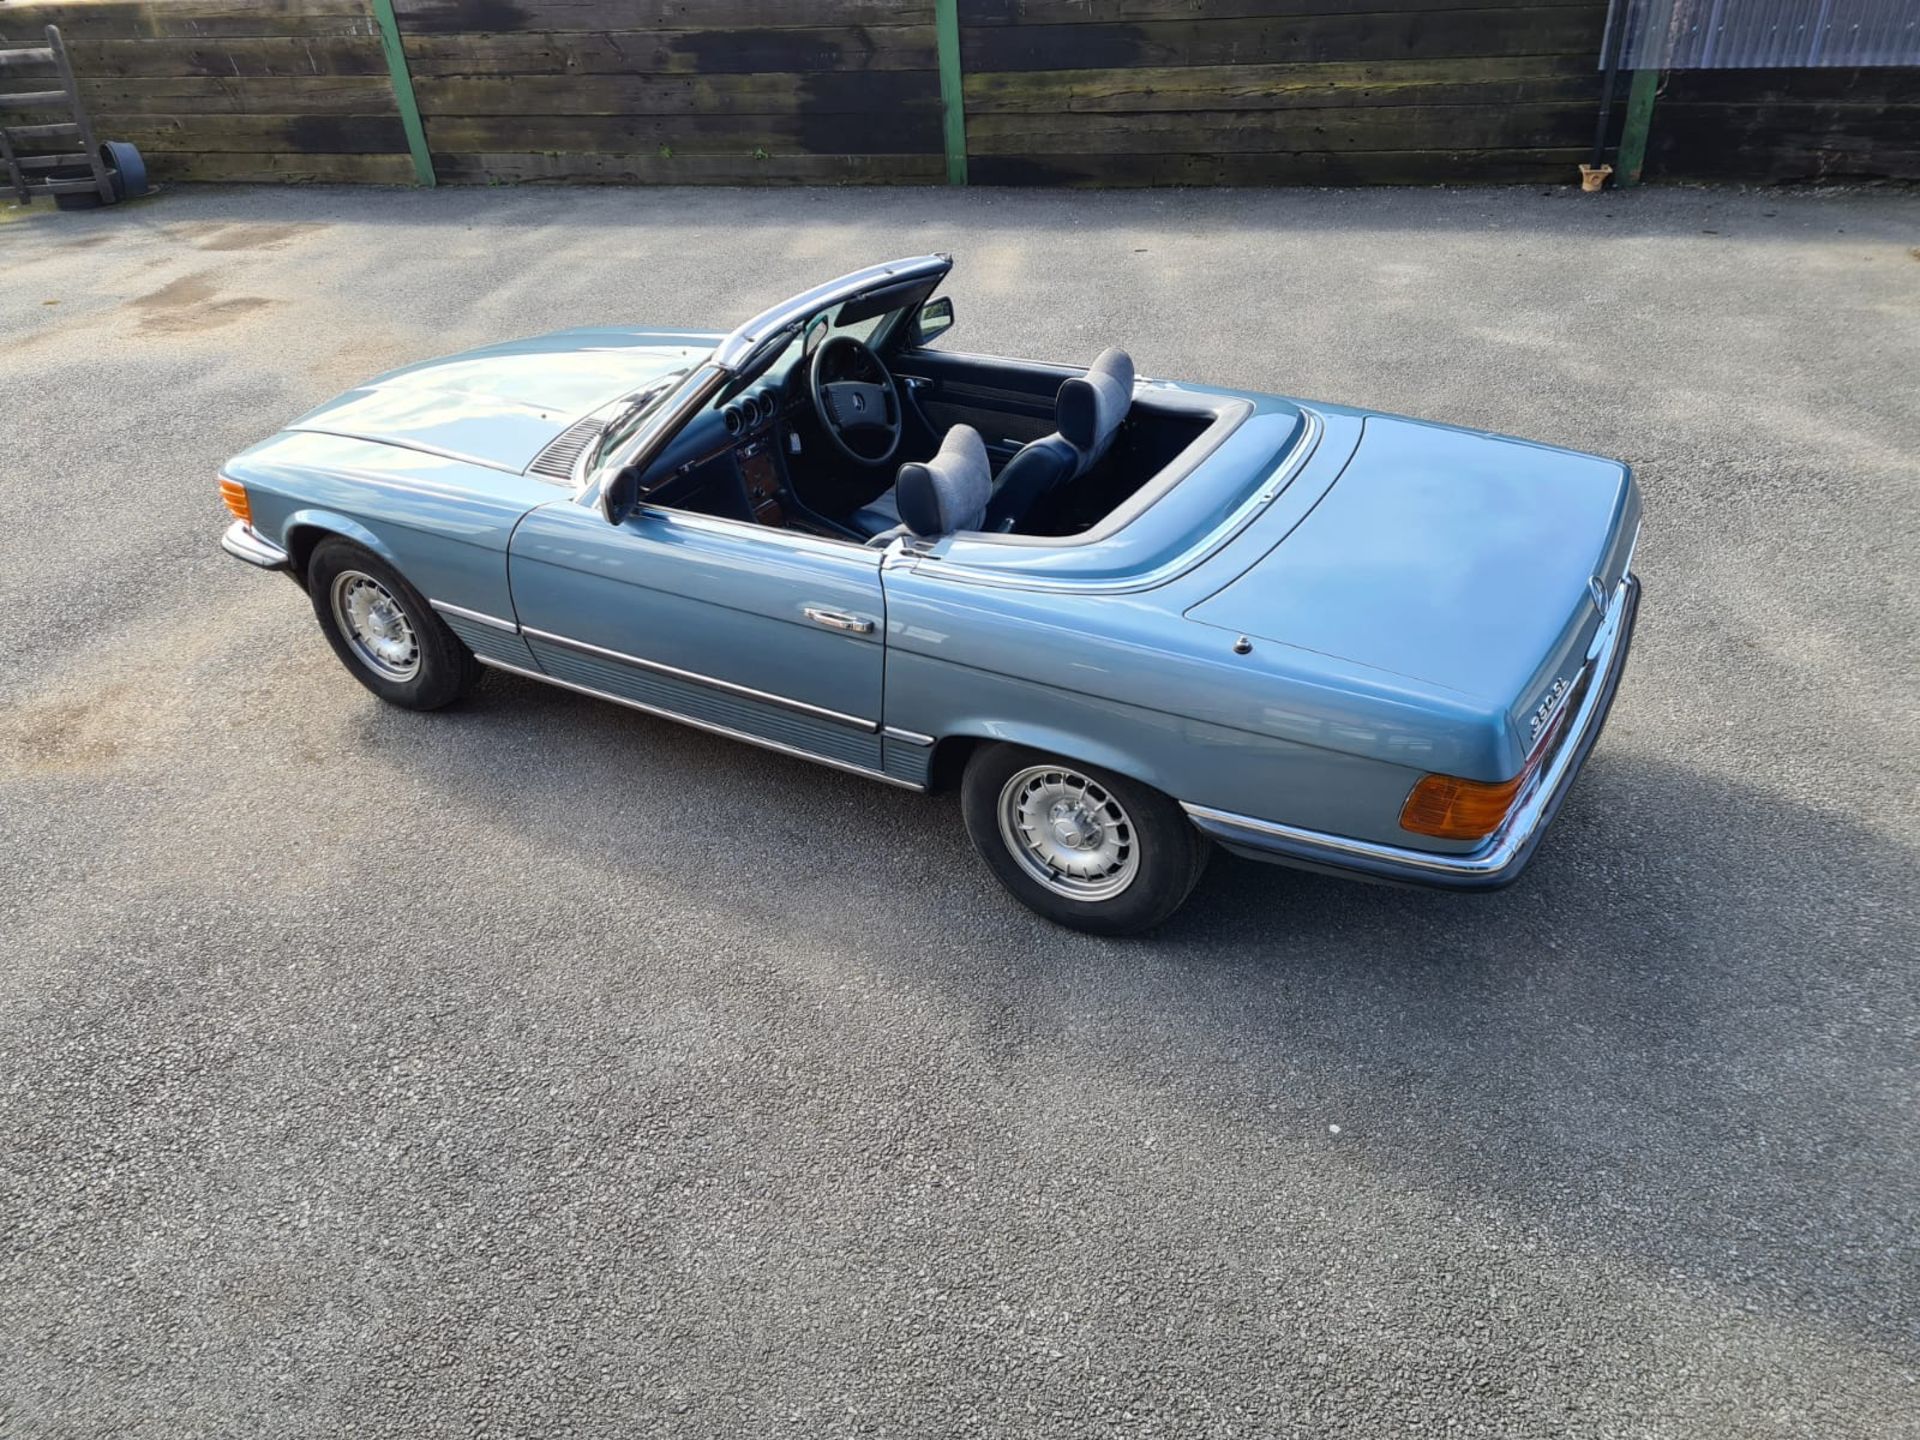 Stunning 1979 Mercedes Benz SL350 V8 With Factory Hardtop - Restored in 2018 - Image 19 of 22